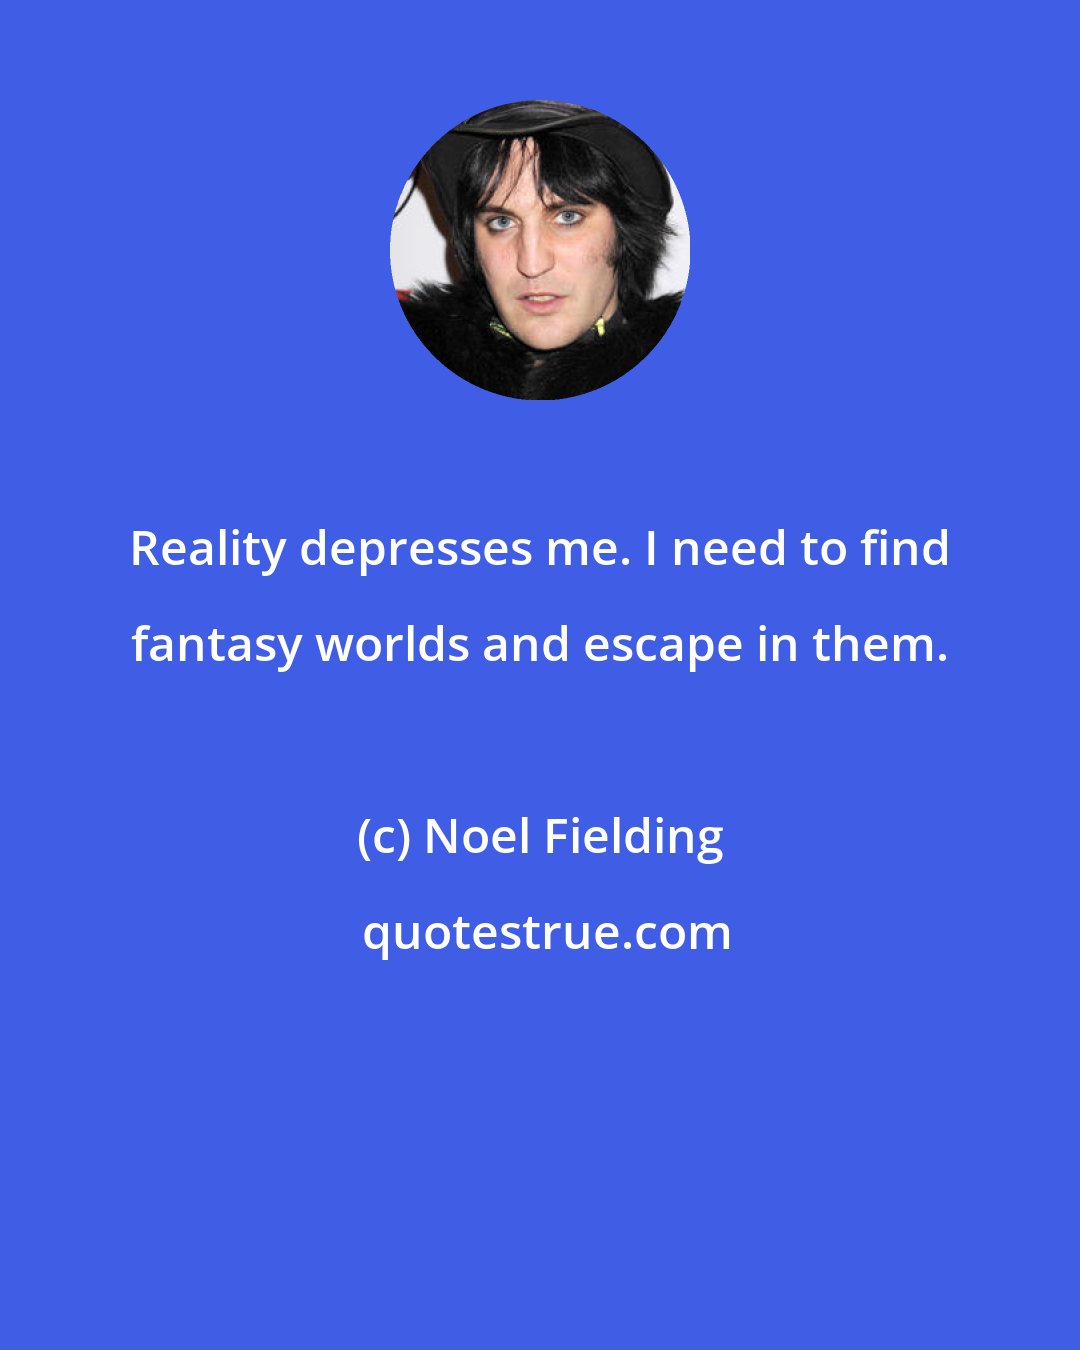 Noel Fielding: Reality depresses me. I need to find fantasy worlds and escape in them.